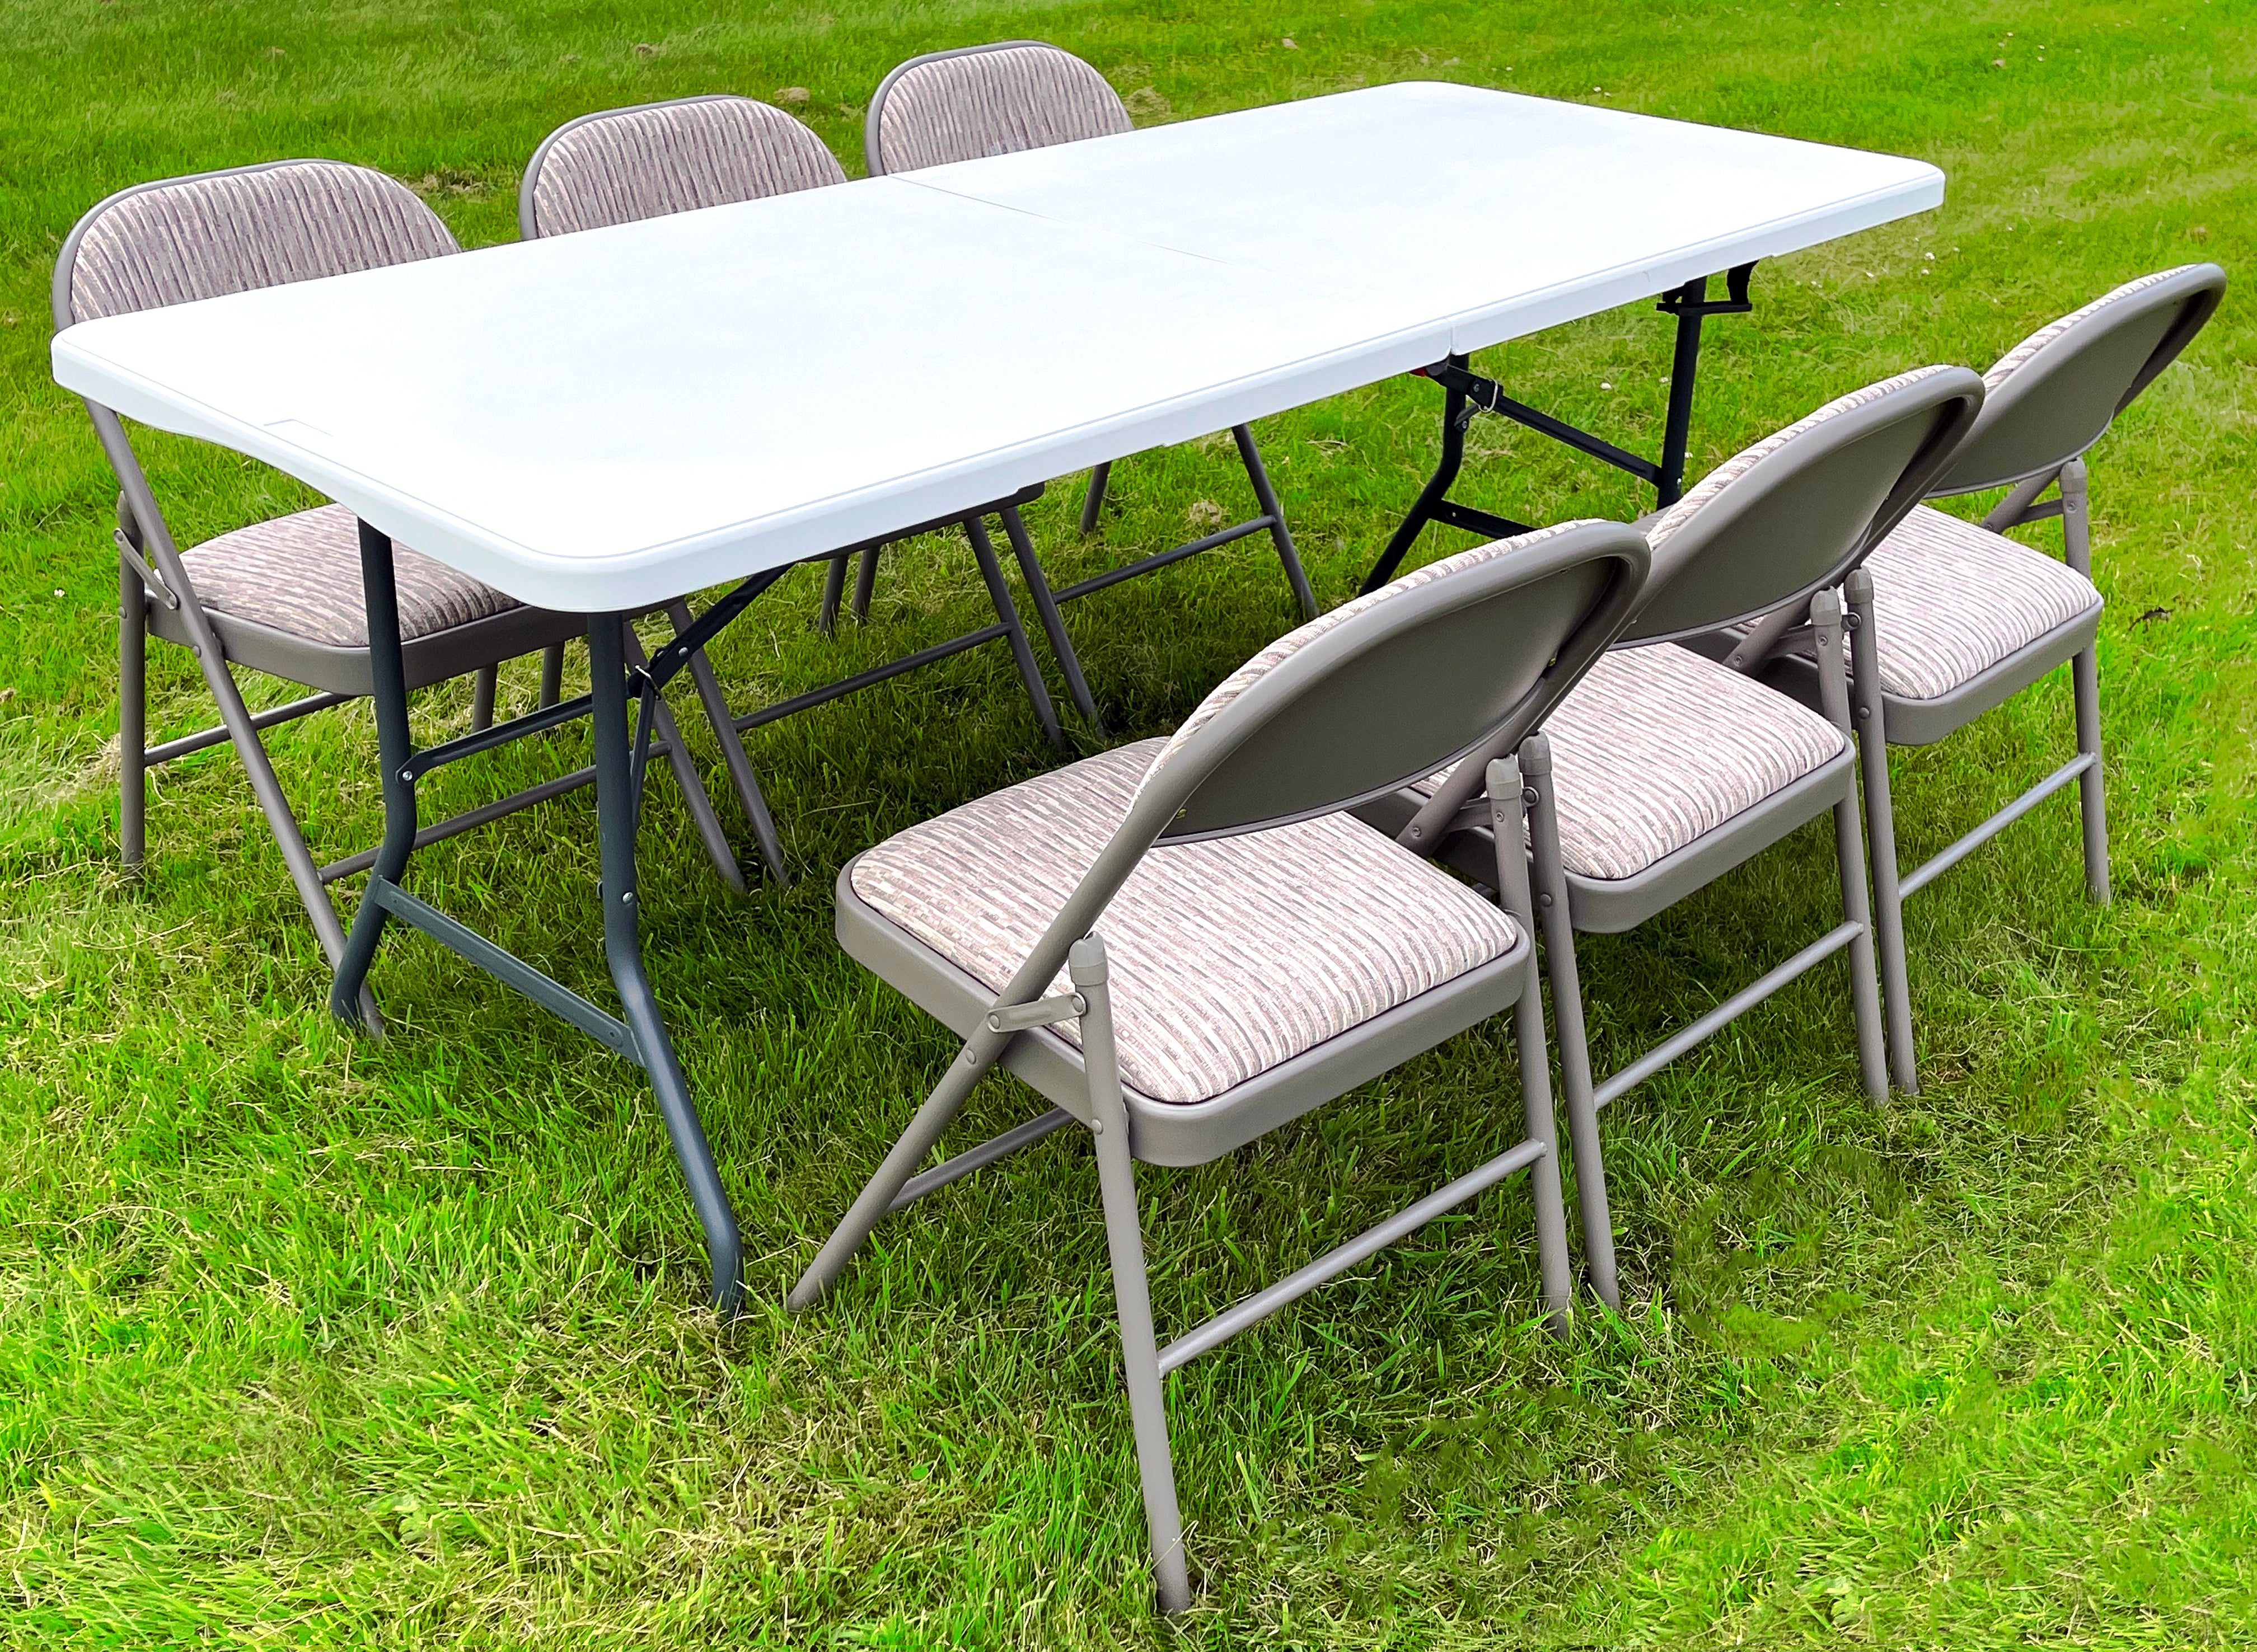 6 Feet Folding Table with 6 Fold Away Chairs